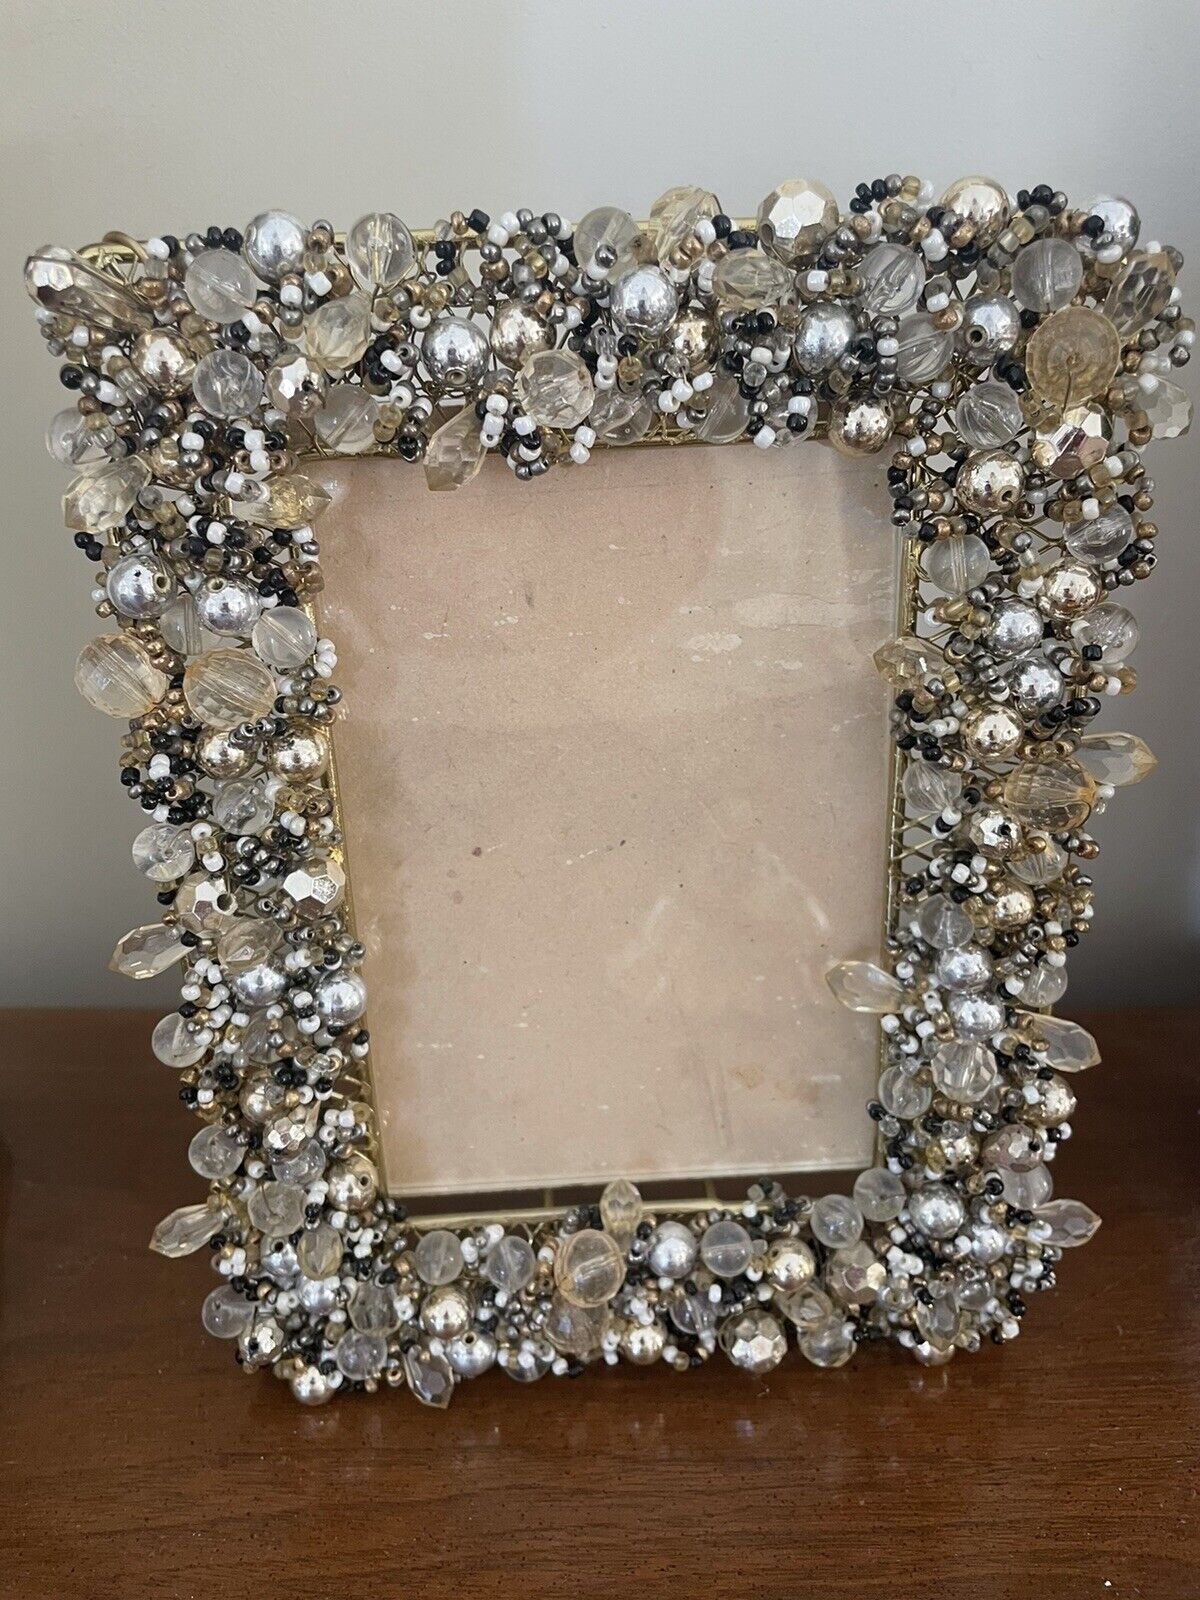 MacKenzie Childs Silver Gold Beaded Photo Picture Designer Frame 4 x 6 Rare